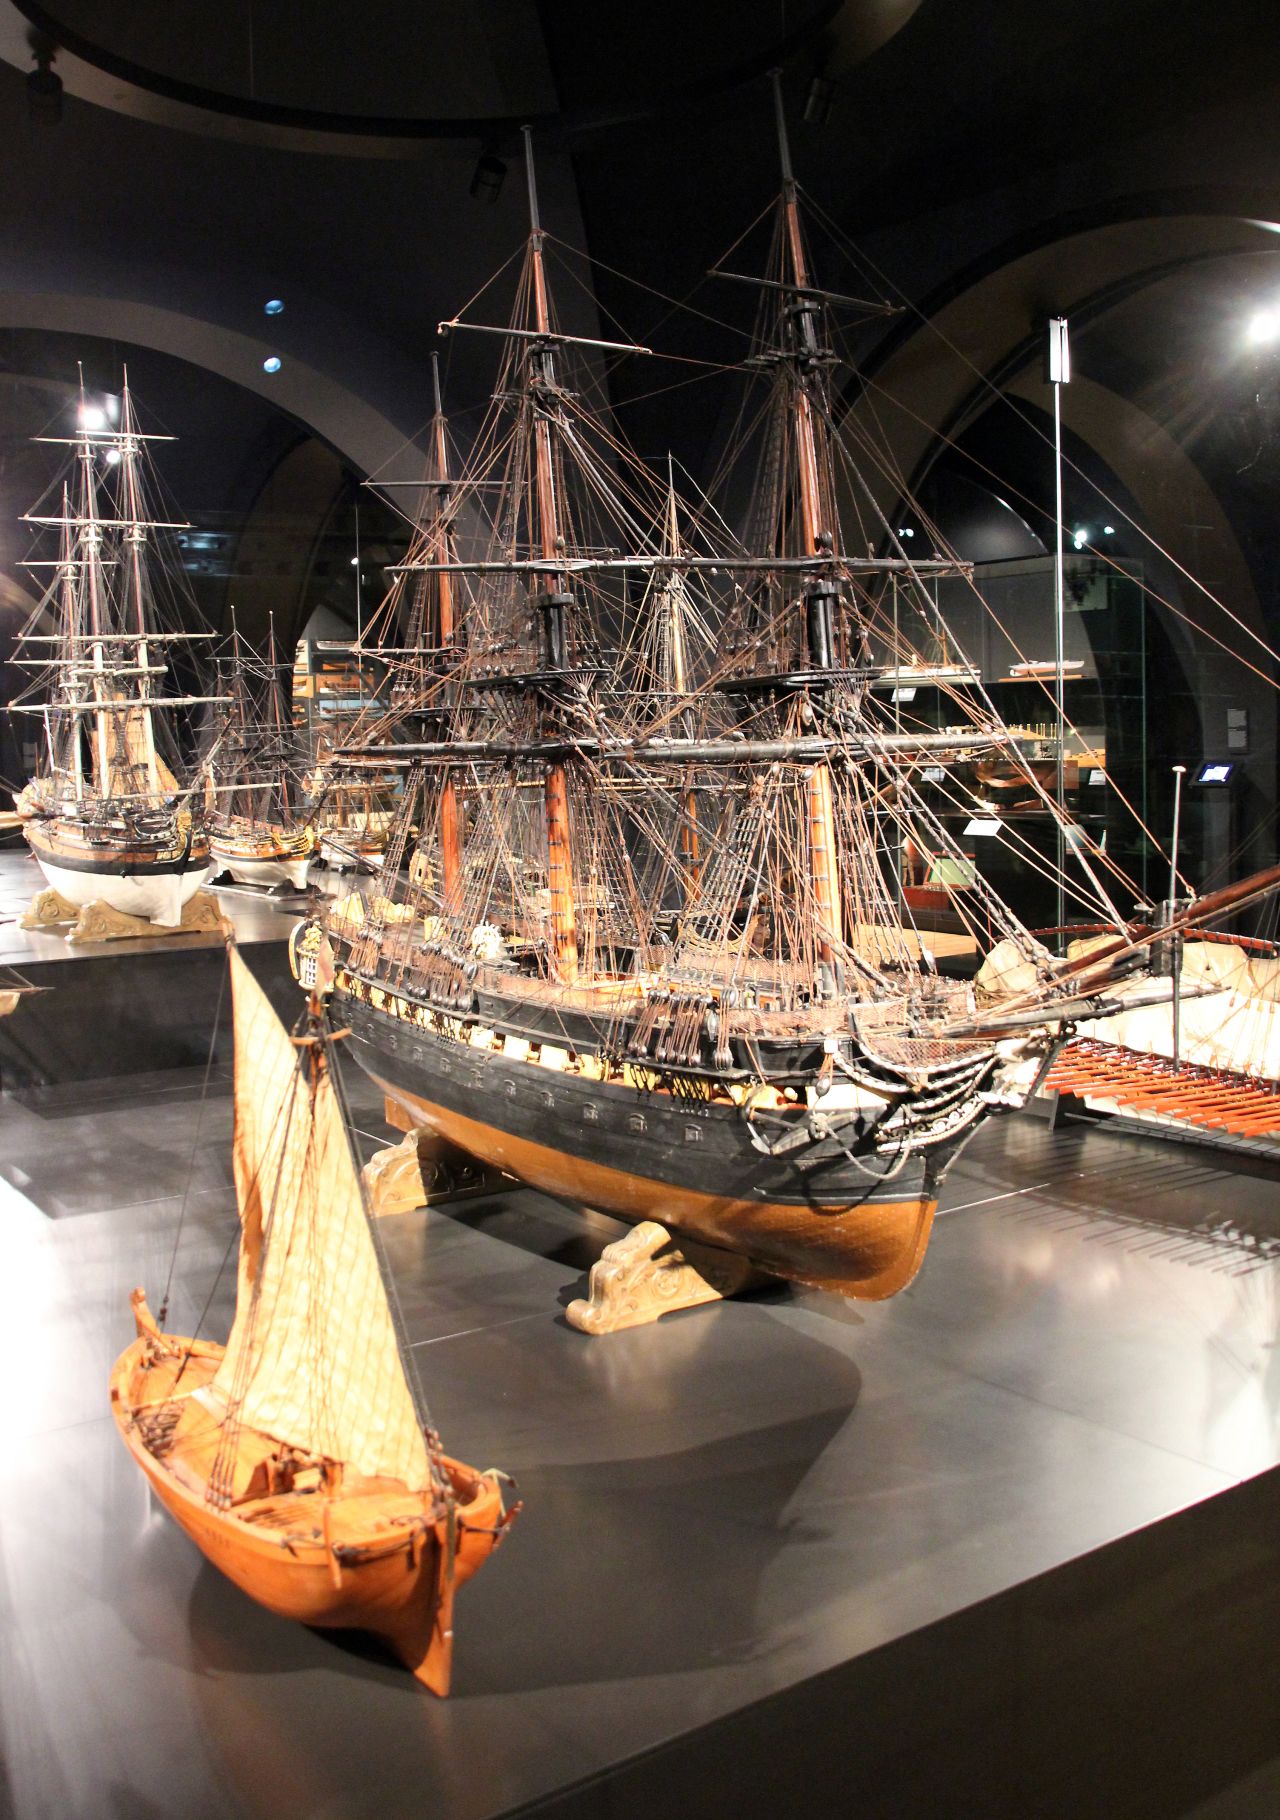 The museum's special collections, of weapons, fashion and jewellery, Dutch porcelain and musical instruments are displayed in the crypt-like basement. Here, a fleet of model ships sail across the room.